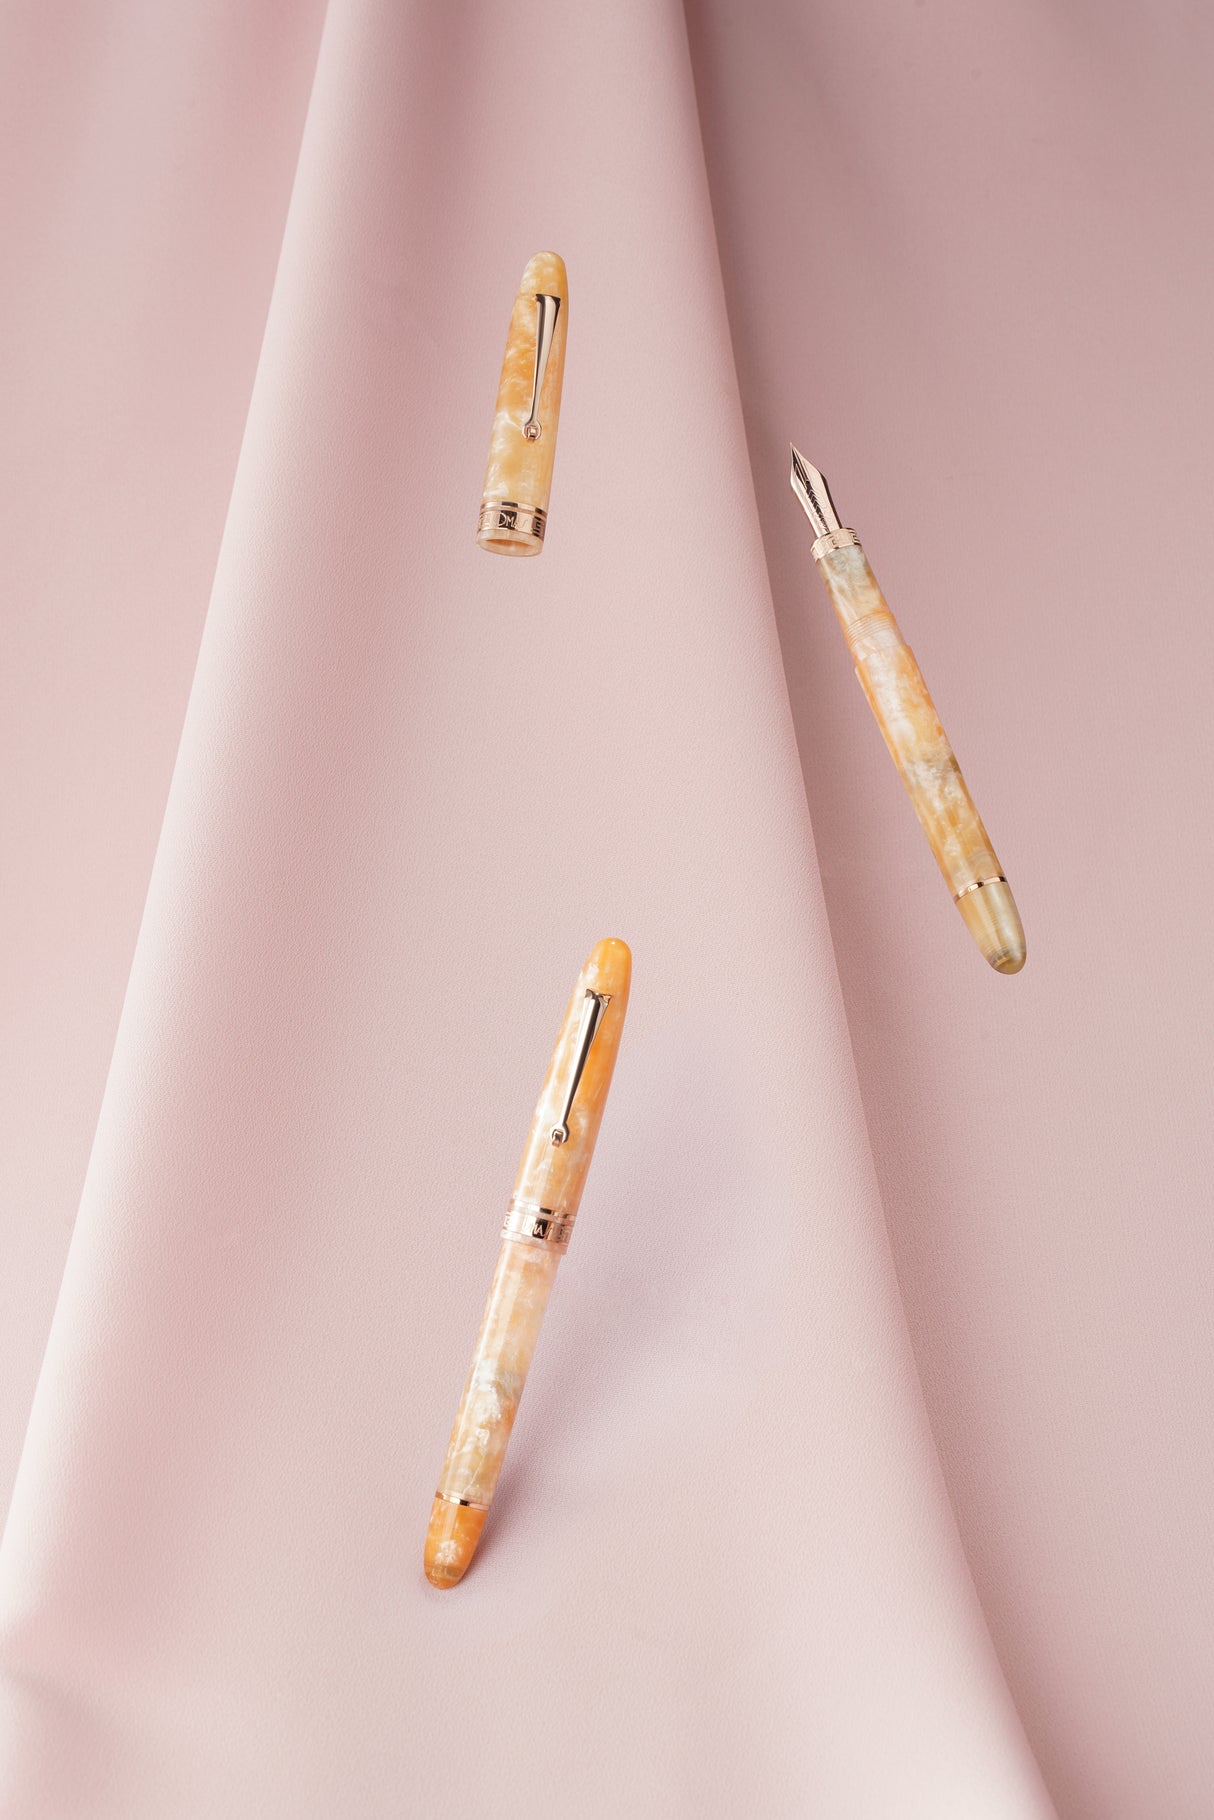 OMAS Ogiva Cocktail Series Peach Bellini Limited Edition Rose Gold Trim - Fountain Pen